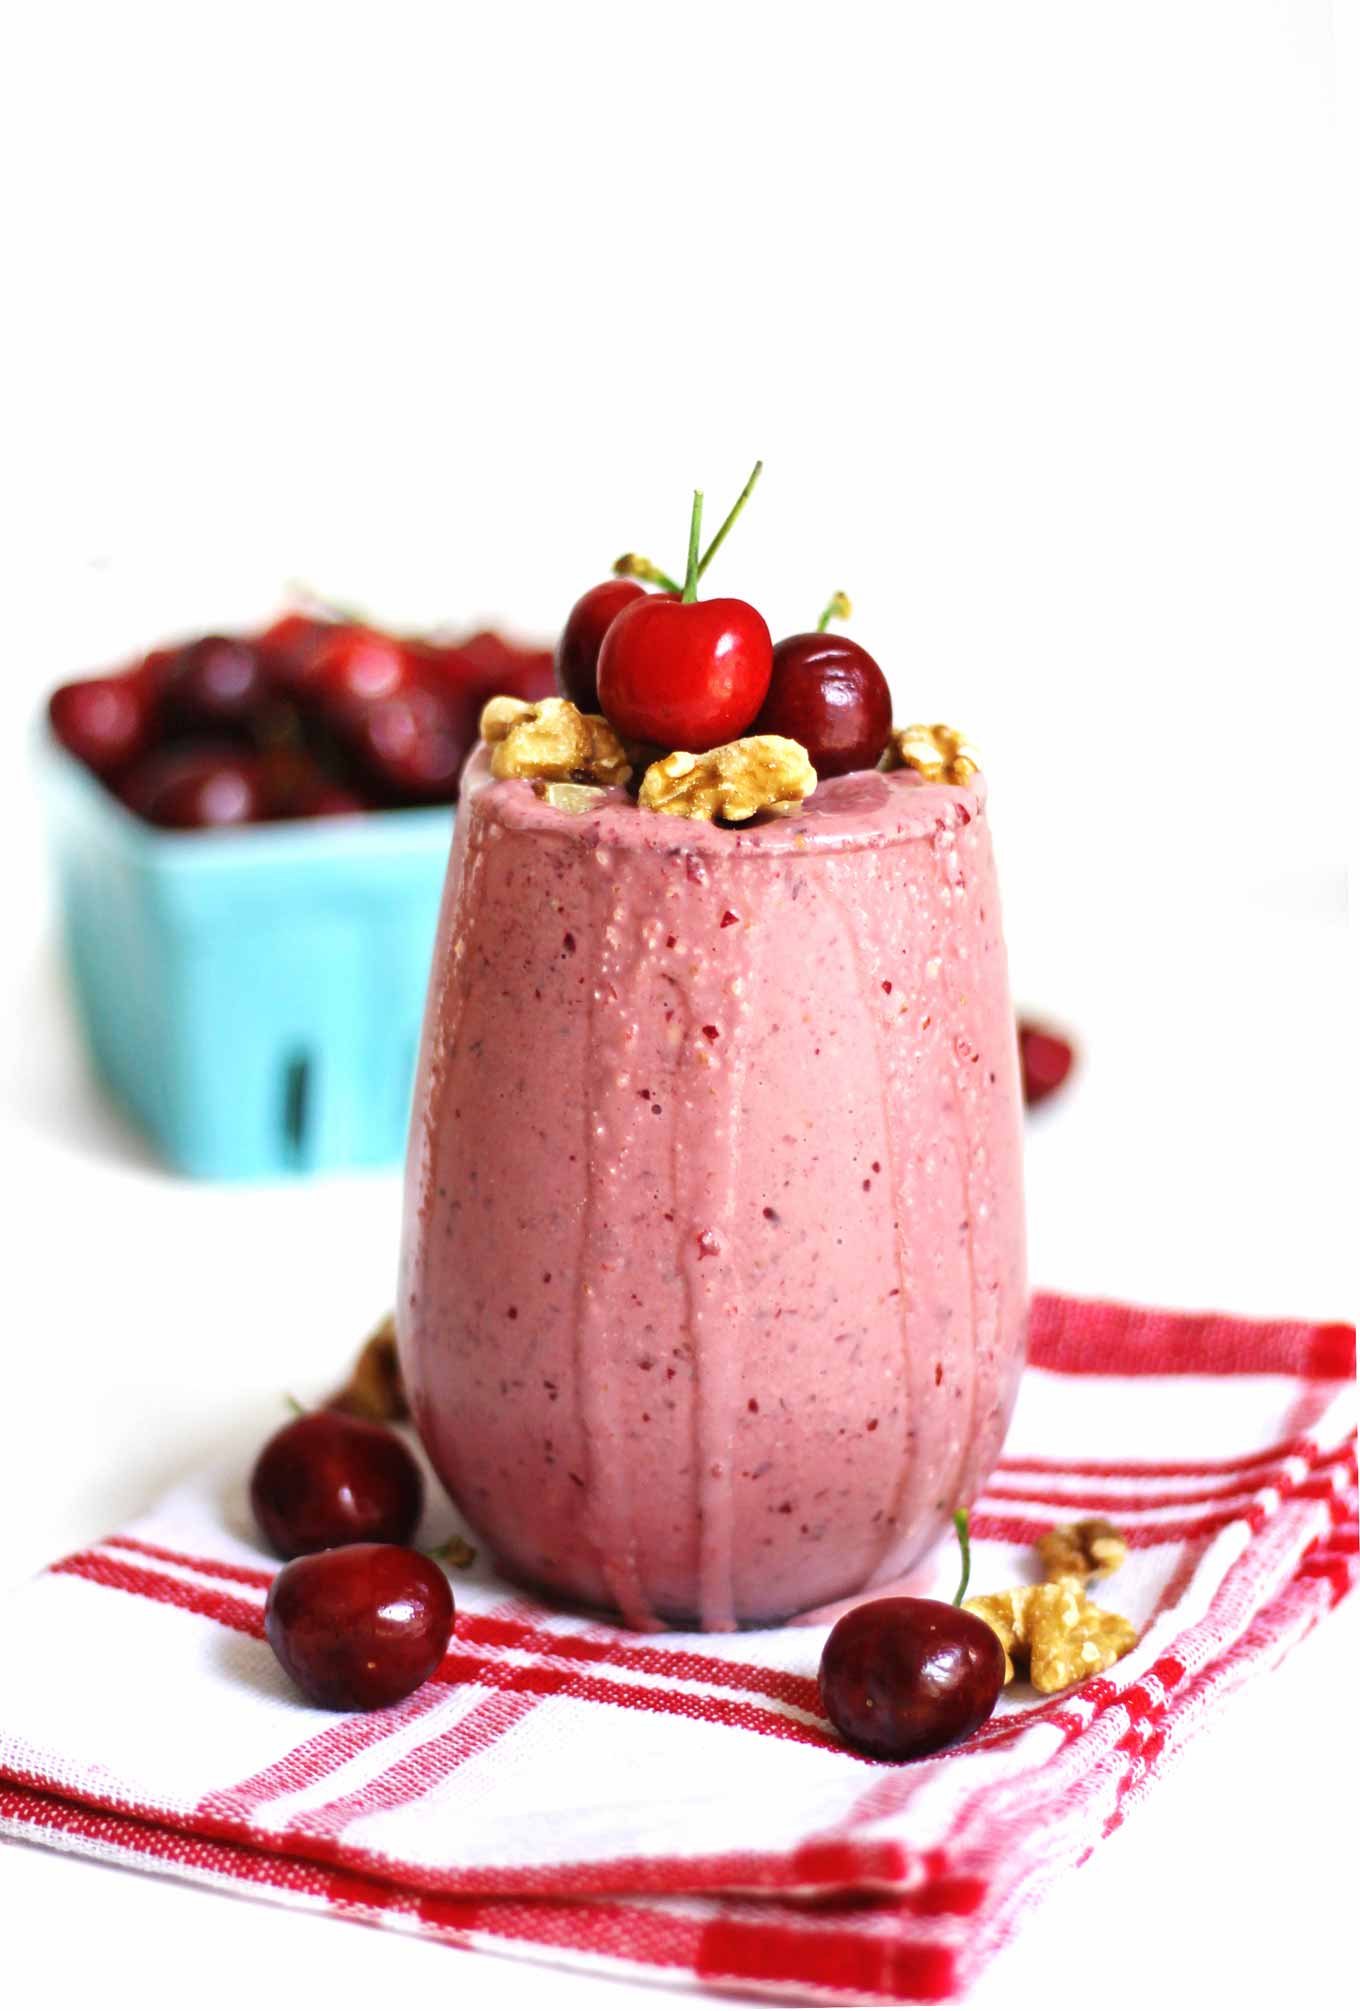 A photo of a cherry smoothie with fresh cherries and walnuts on top.